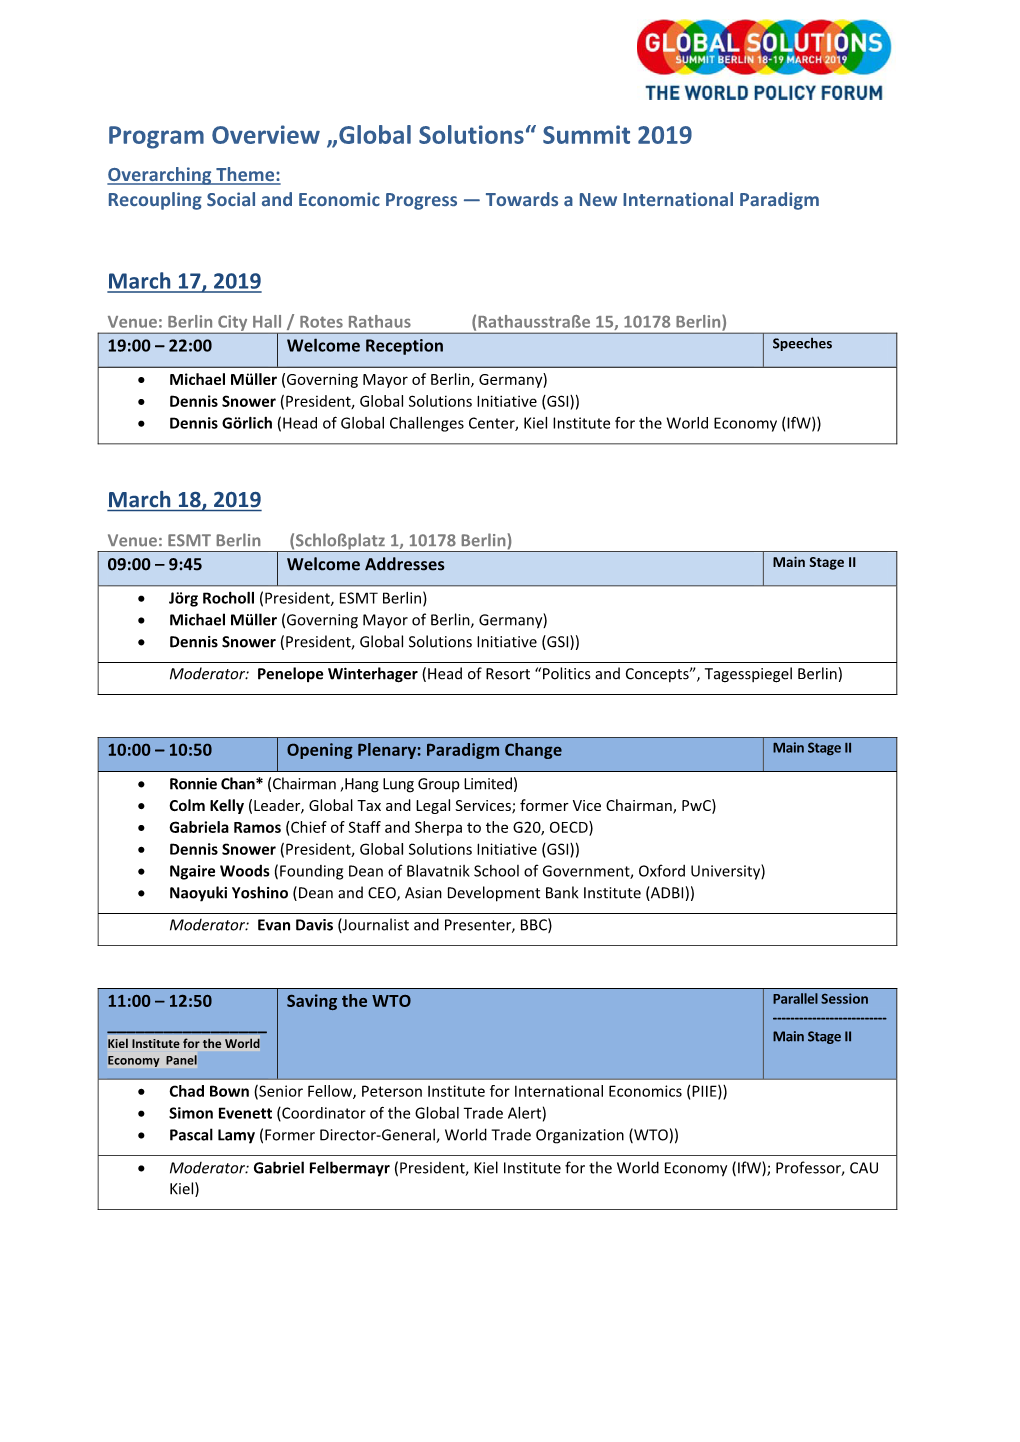 Program Overview „Global Solutions“ Summit 2019 Overarching Theme: Recoupling Social and Economic Progress — Towards a New International Paradigm